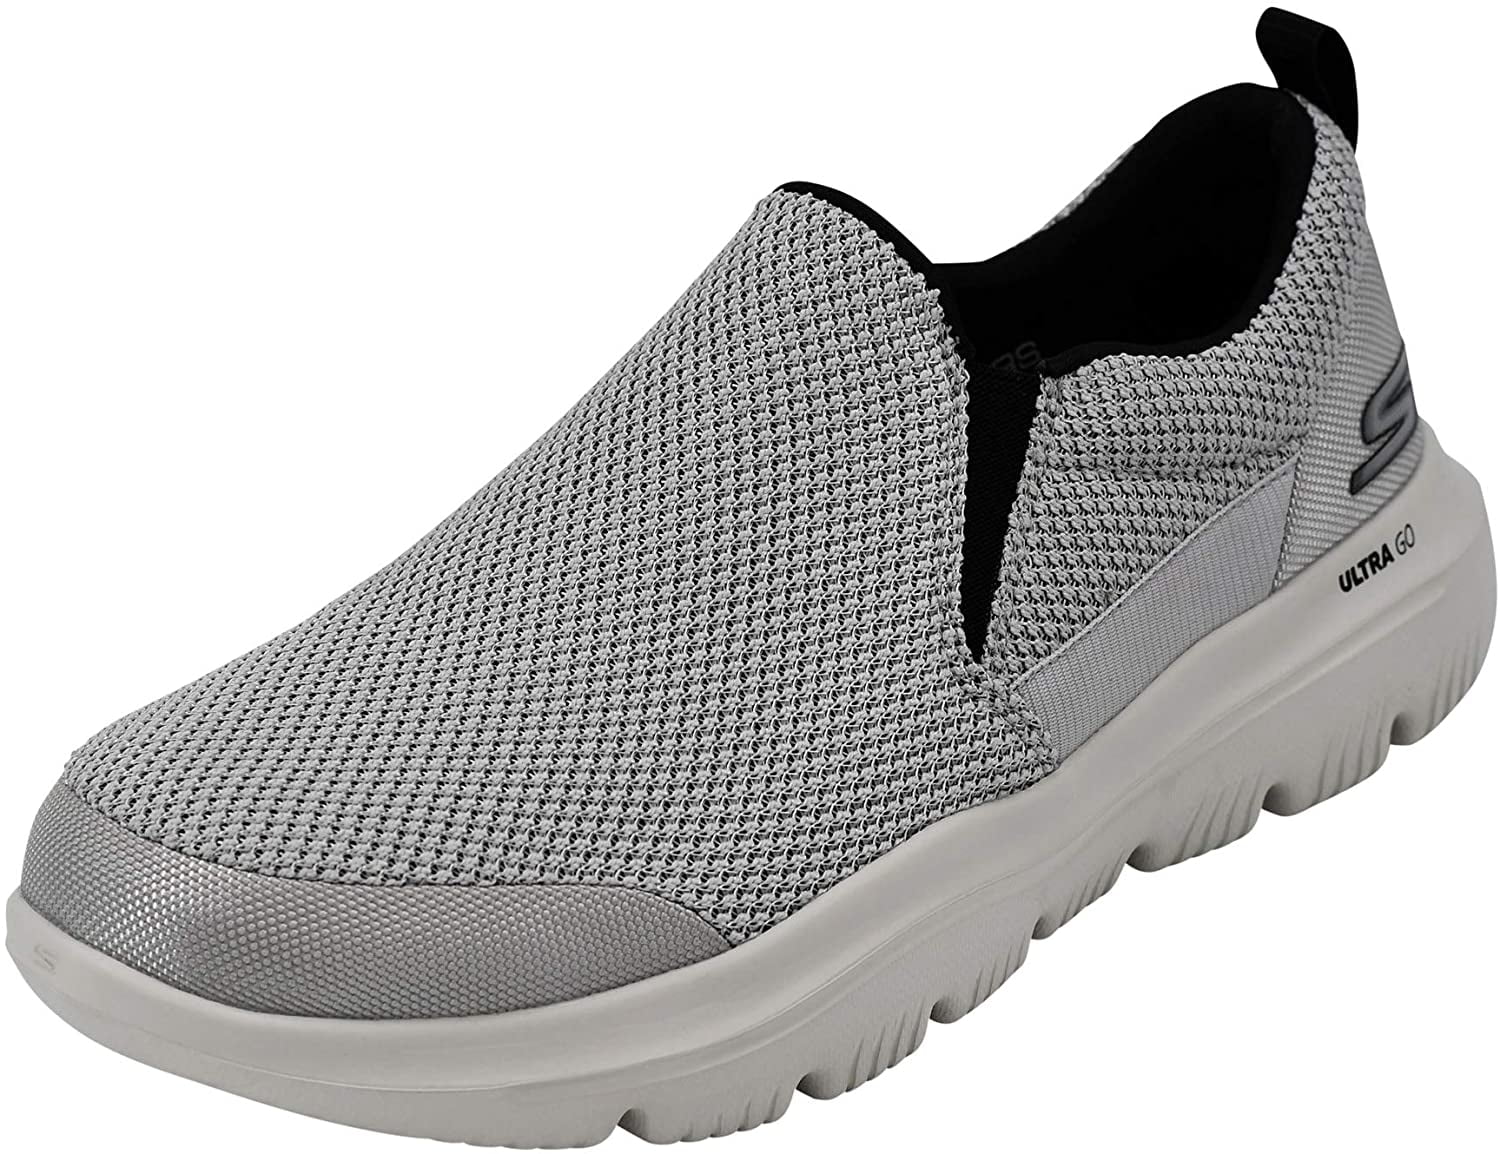 Slip On Men's Sneaker Shoes Go Walk Evolution Ultra Impeccable Casual Shoes 